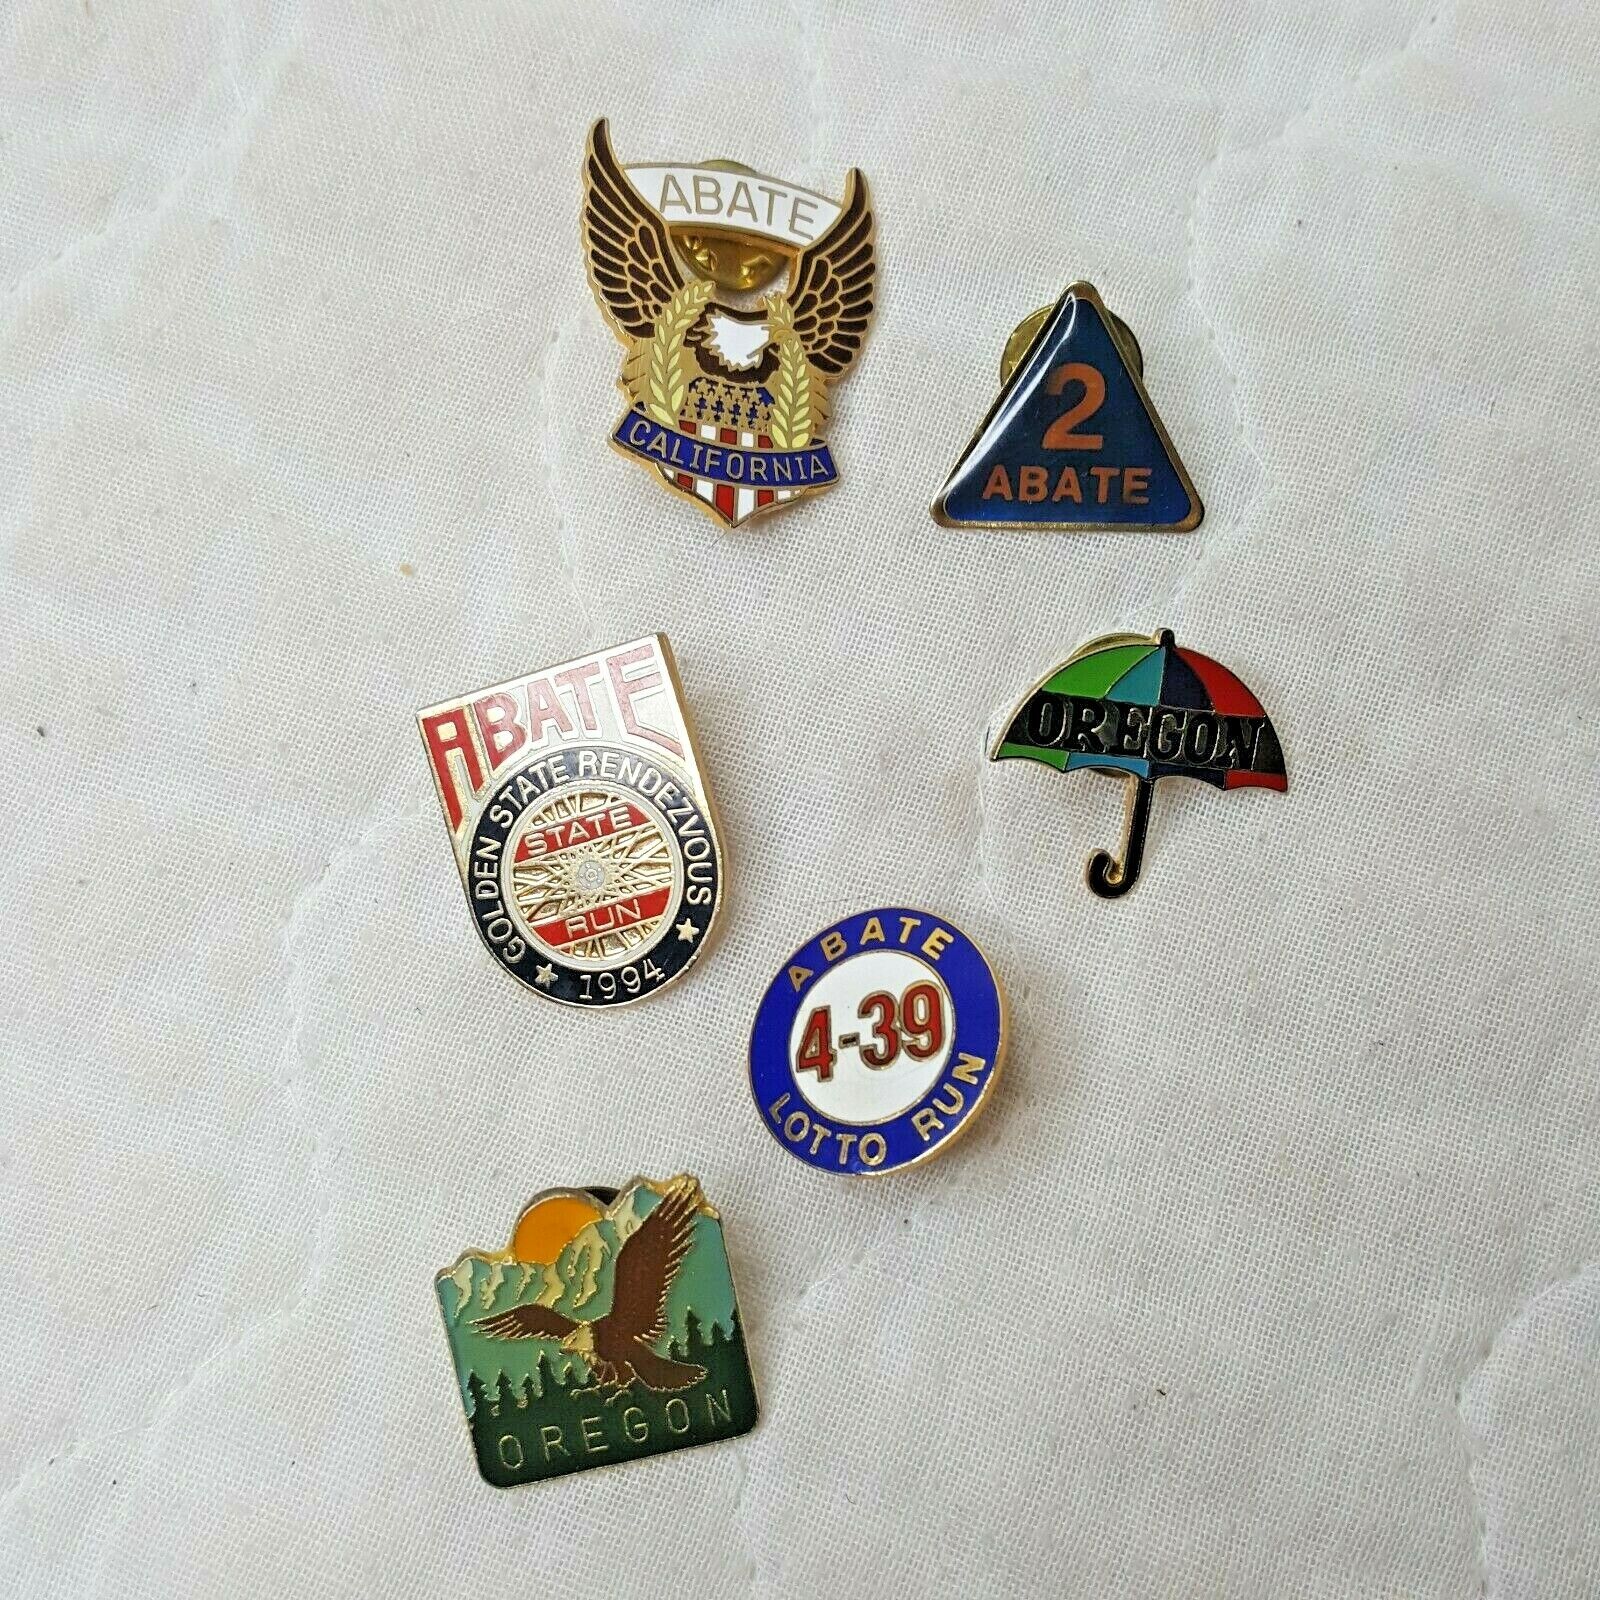 Lot of 6 Lapel Pins 4 ABATE Biker Pins and 2 Oregon State Pins 